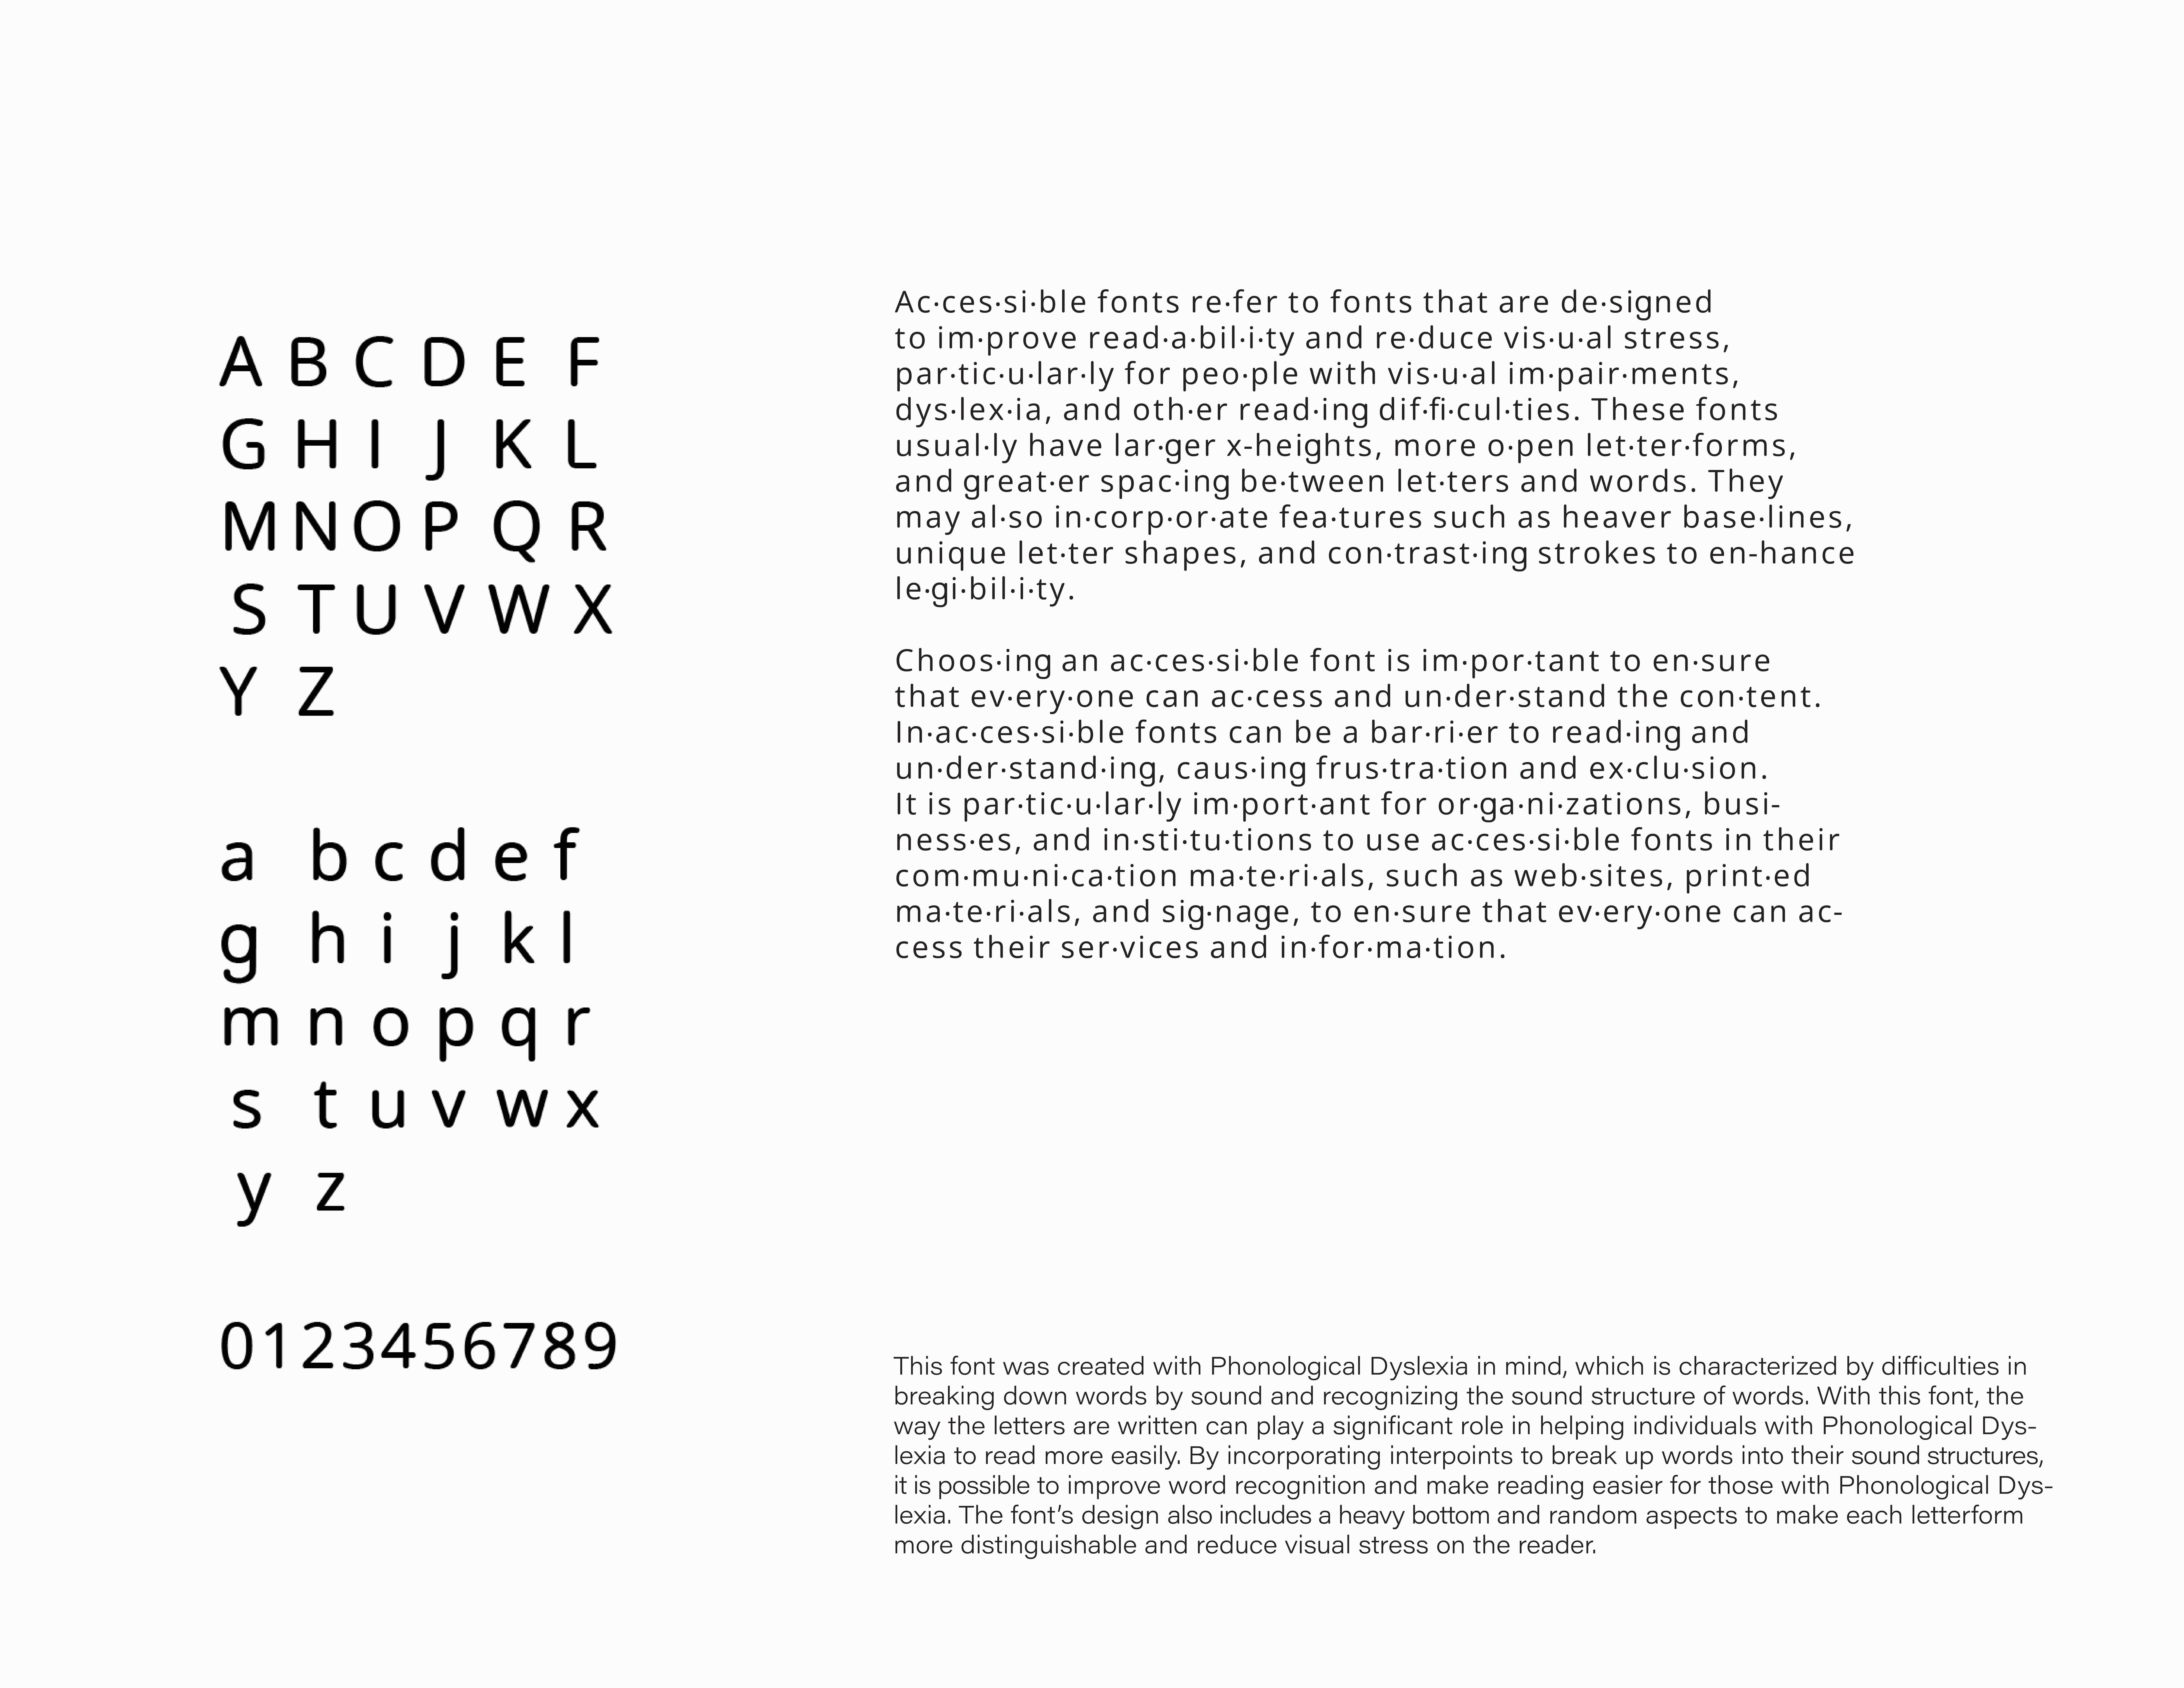 Accessible Typography